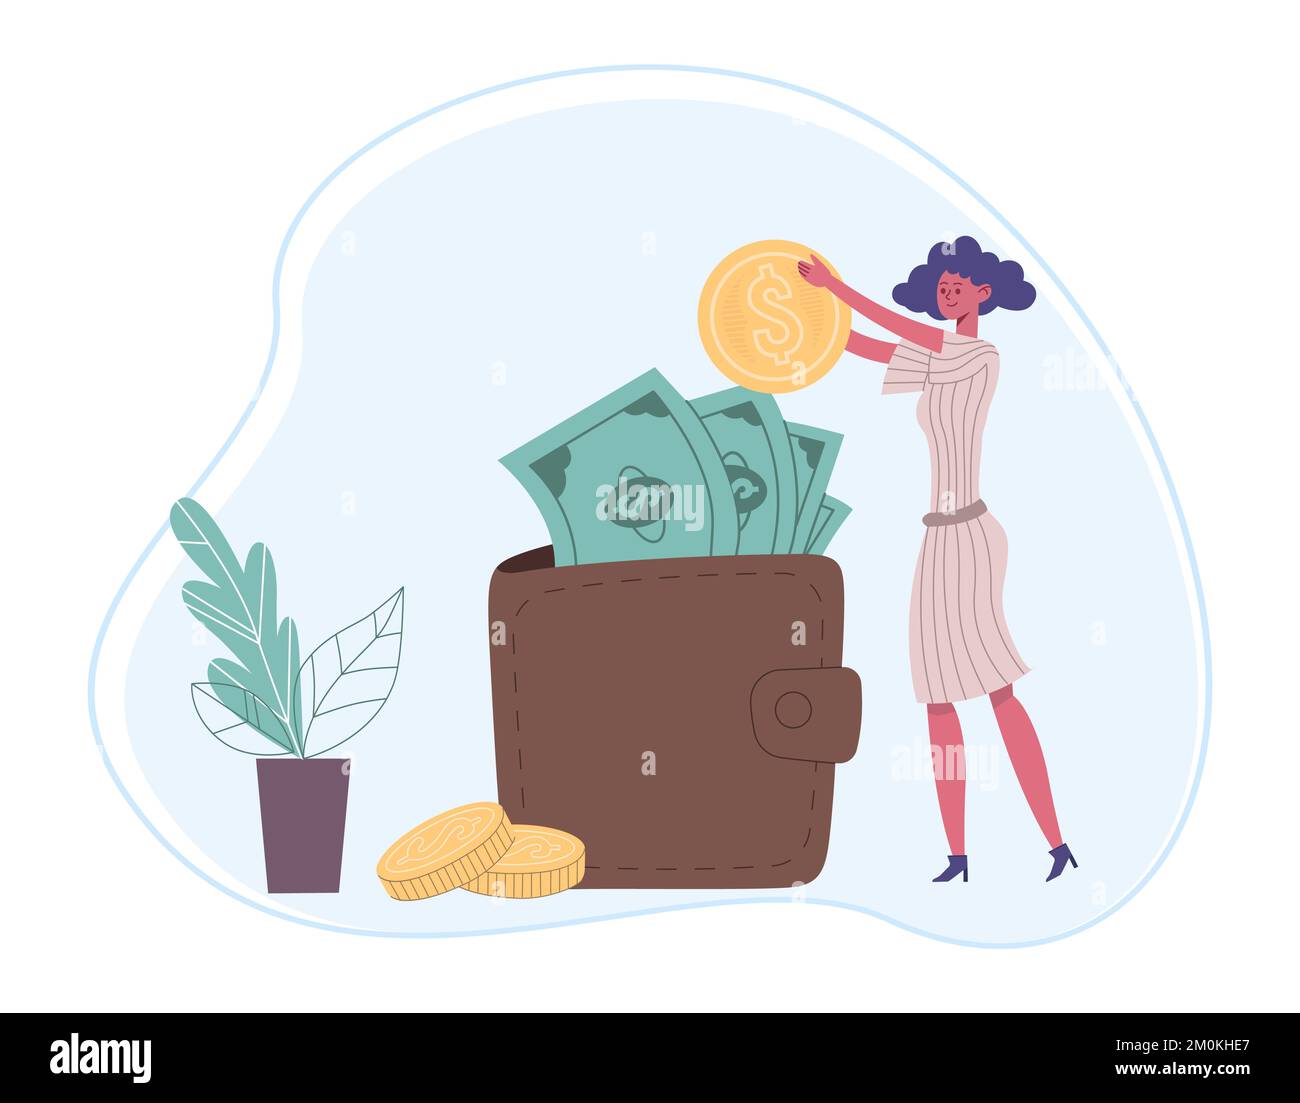 Saving money financial concept. Woman worker putting gold coin into wallet full of dollar banknotes. Female character Stock Vector